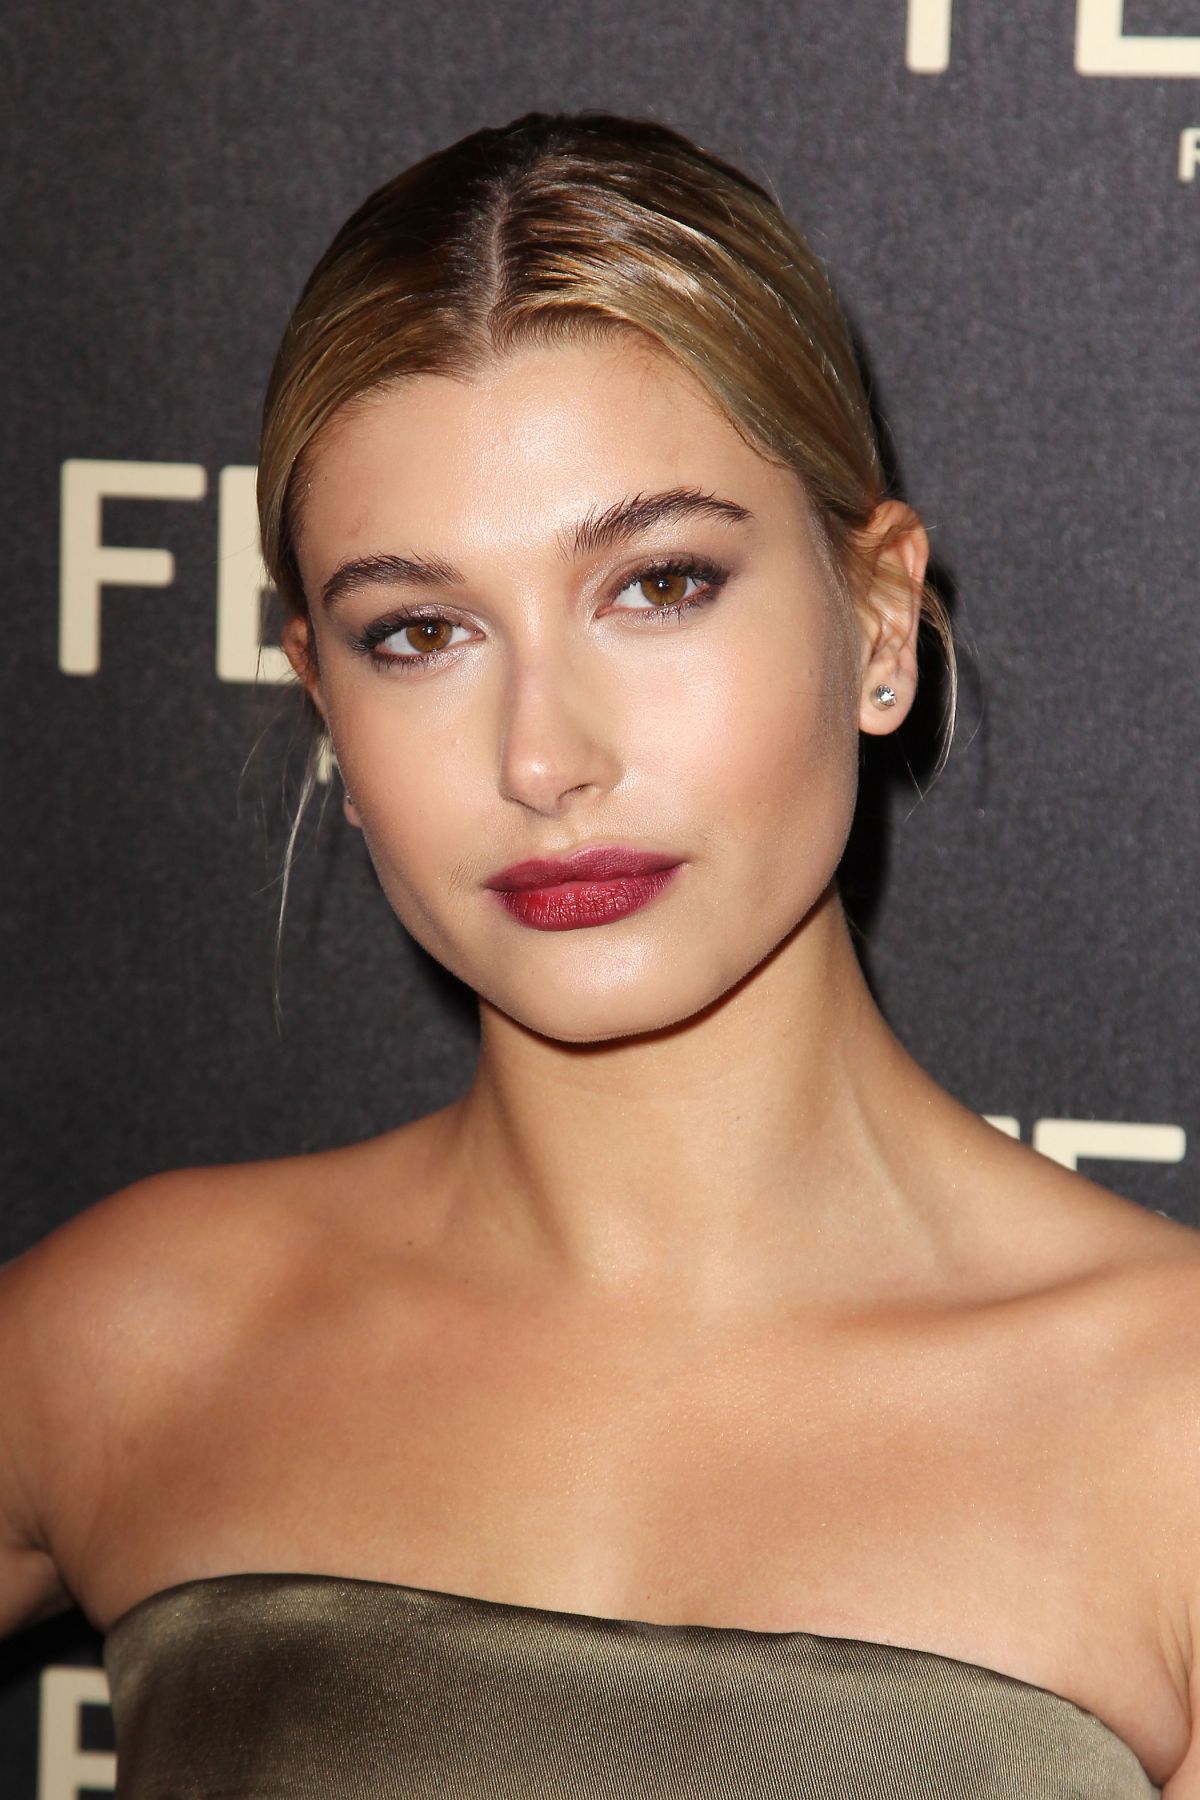 hailey-baldwin-at-fendi-new-york-flagship-boutique-party-at-mbfw-in-new-york_25.jpg